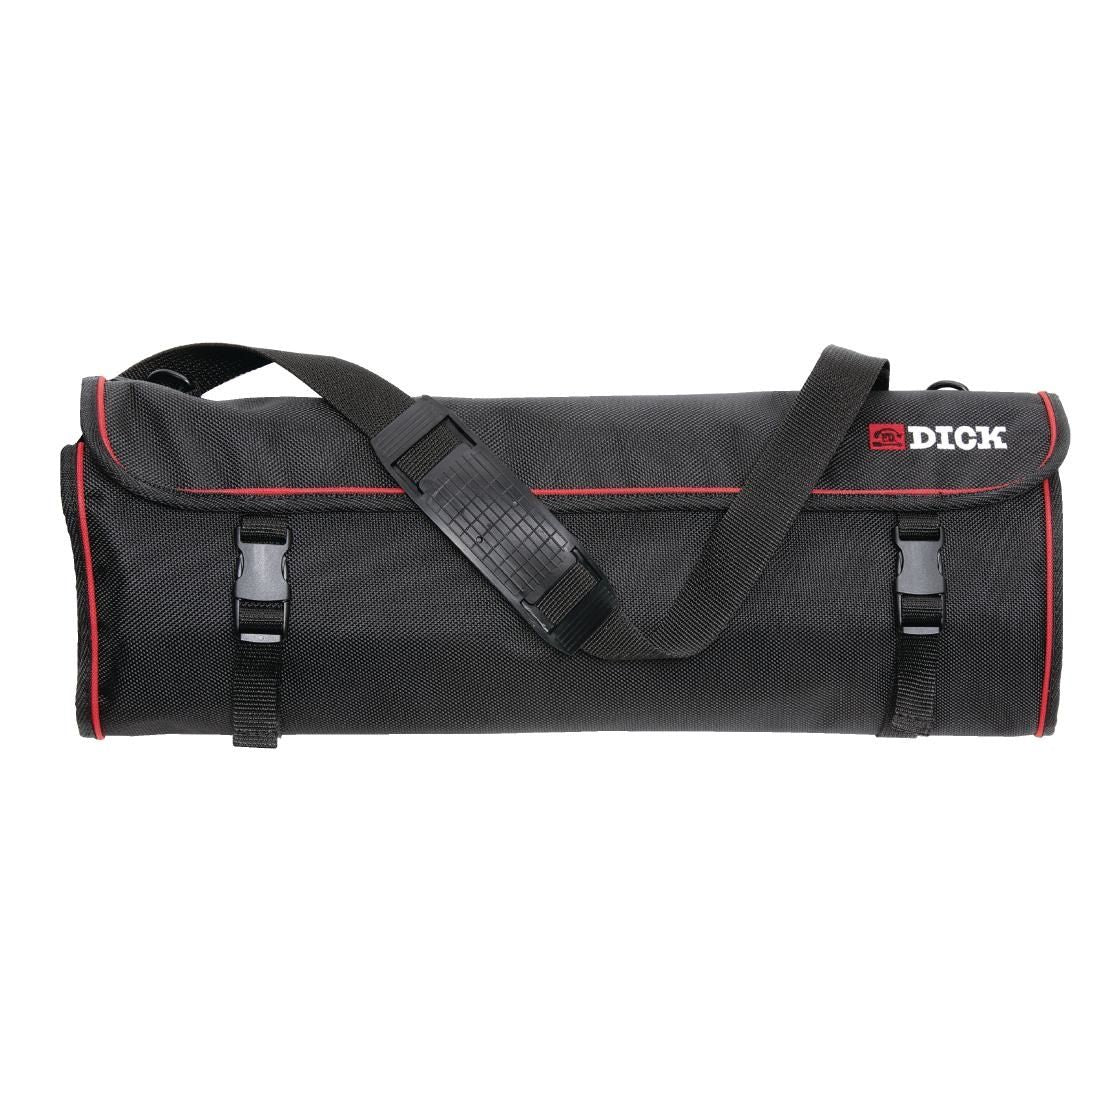 GD796 Dick Black Textile Roll Bag and Strap 11 Slots JD Catering Equipment Solutions Ltd